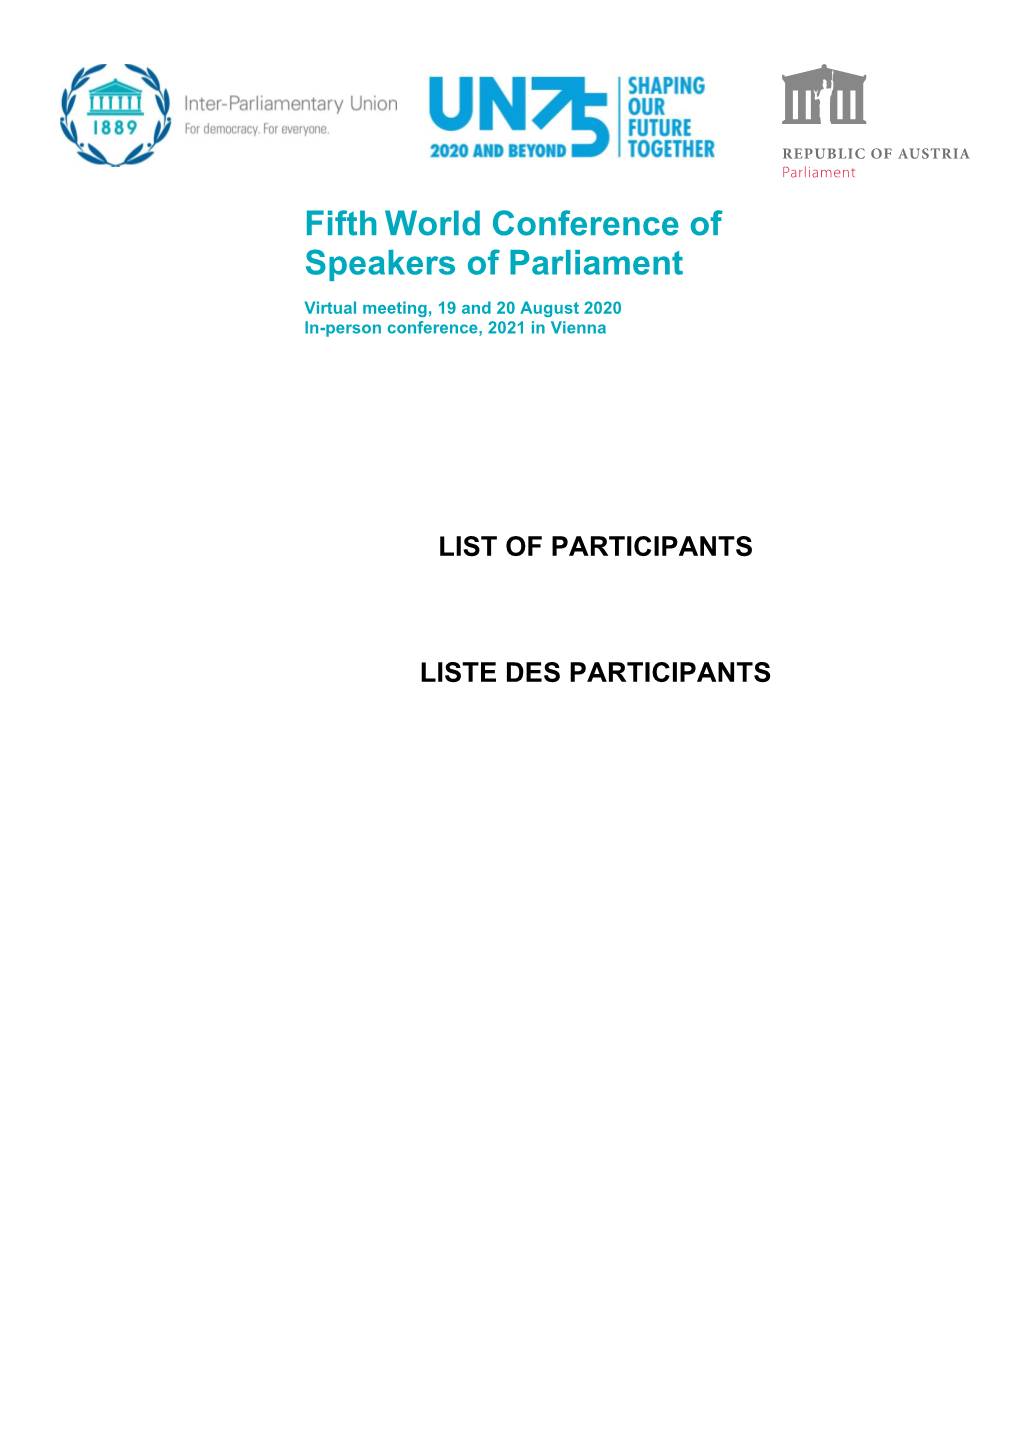 Fifthworld Conference of Speakers of Parliament